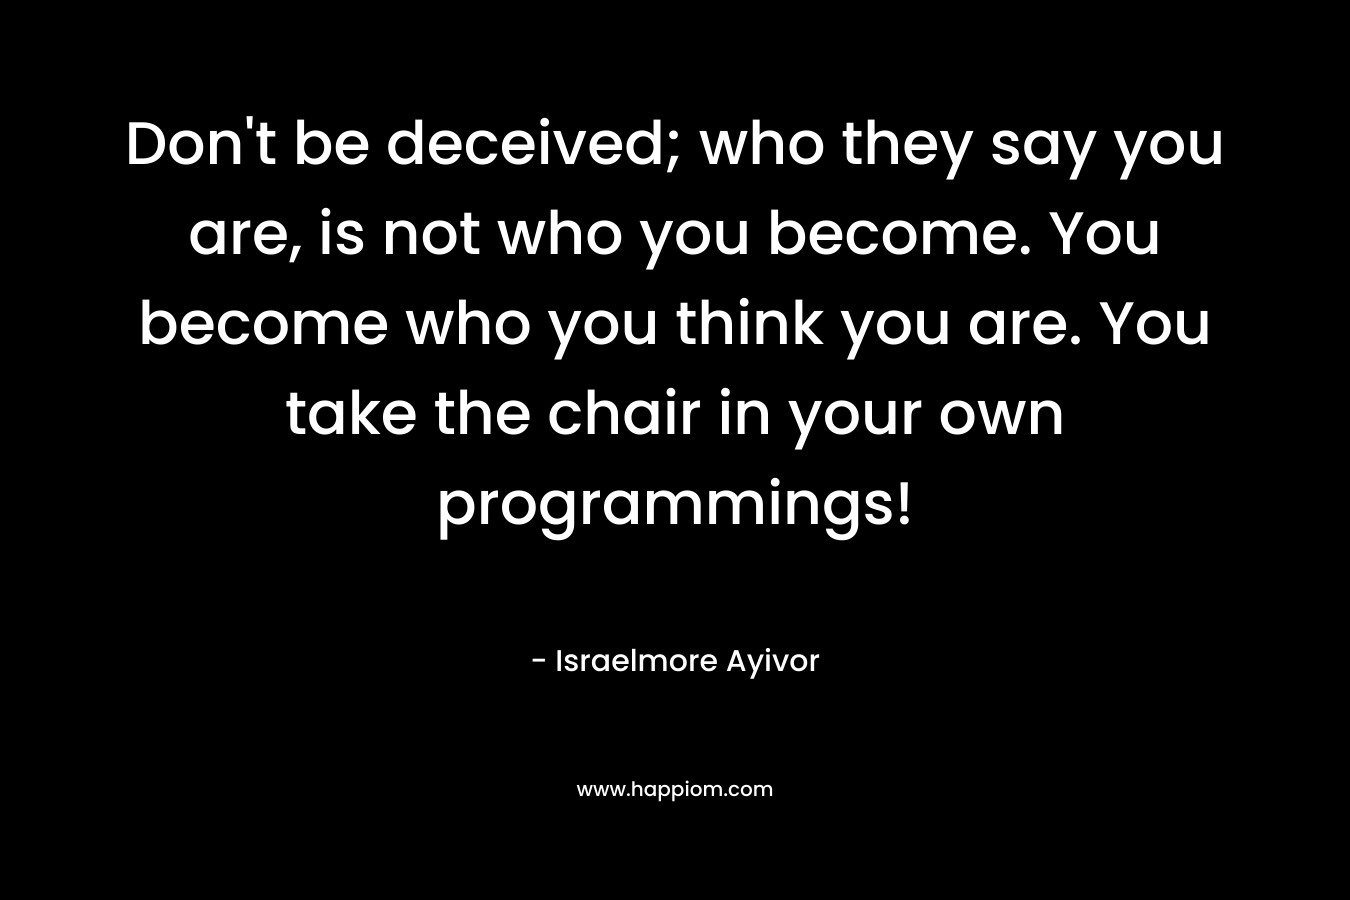 Don't be deceived; who they say you are, is not who you become. You become who you think you are. You take the chair in your own programmings!